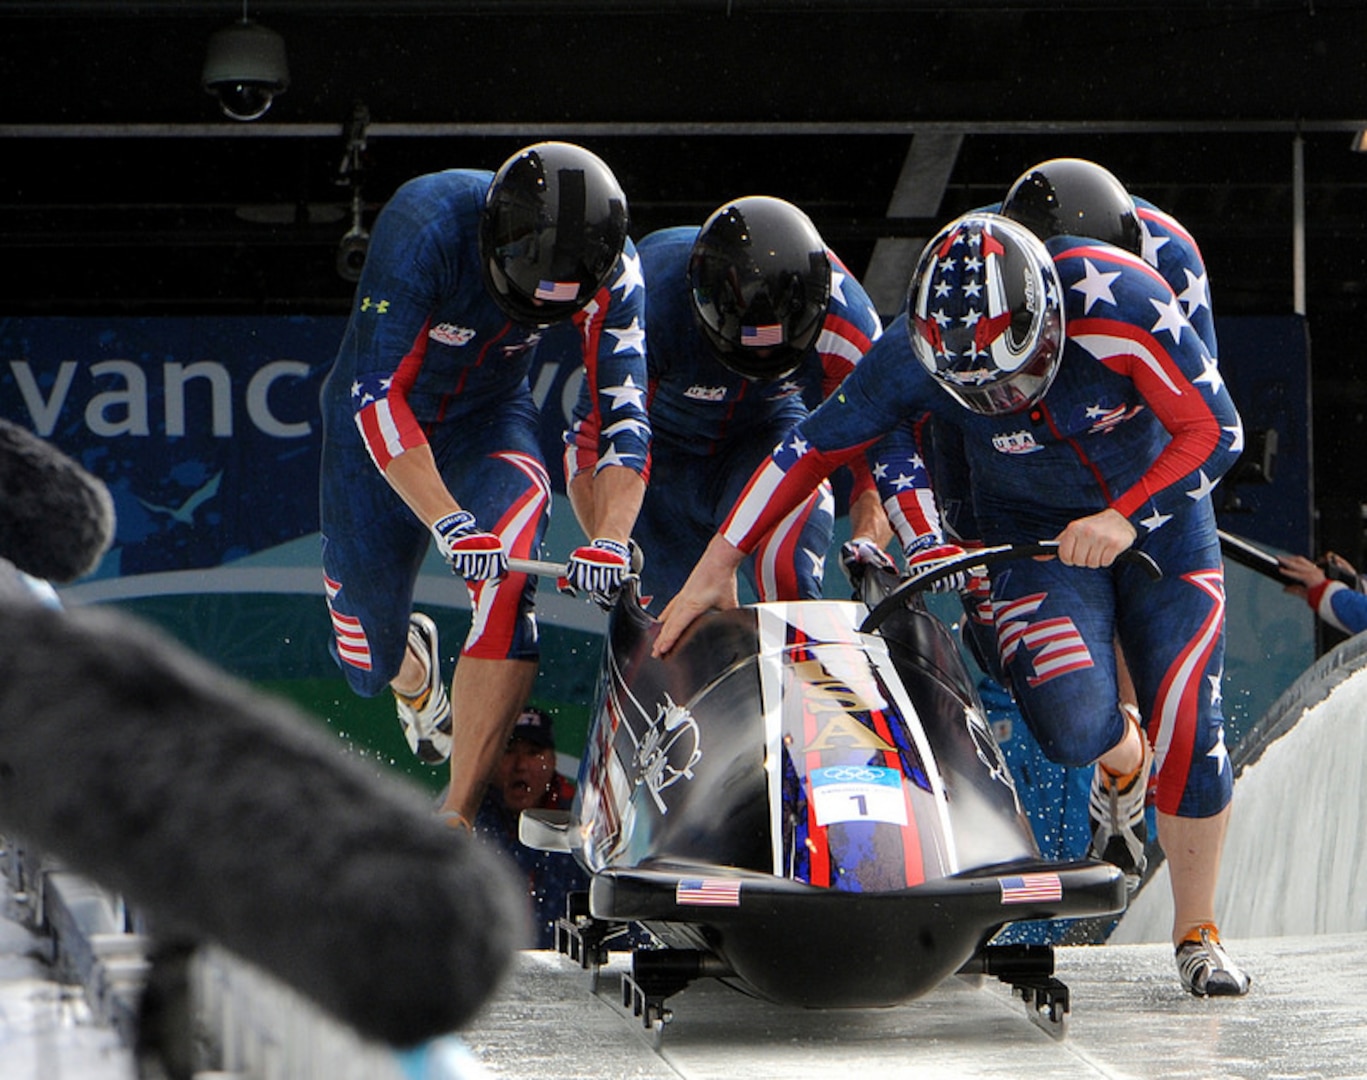 Former U.S. Army World Class Athlete Program bobsledder Steven Holcomb (front right) leads "The Night Train" team of WCAP Sgt. Justin Olsen, Steve Mesler and Curtis Tomasevicz to a start time of 4.77 seconds in the third heat of the Olympic four-man bobsled event. The quartet won an Olympic gold medal in bobsleigh for Team USA for the first time in 62 years at the Whistler Sliding Centre during the 2010 Olympic Winter Games. Nine Soldiers have been named to the 2014 Sochi Winter Olympics including Sgt Justin Olsen pictured here.  U.S. Army photo by Tim Hipps, IMCOM G9 MWR Public Affairs